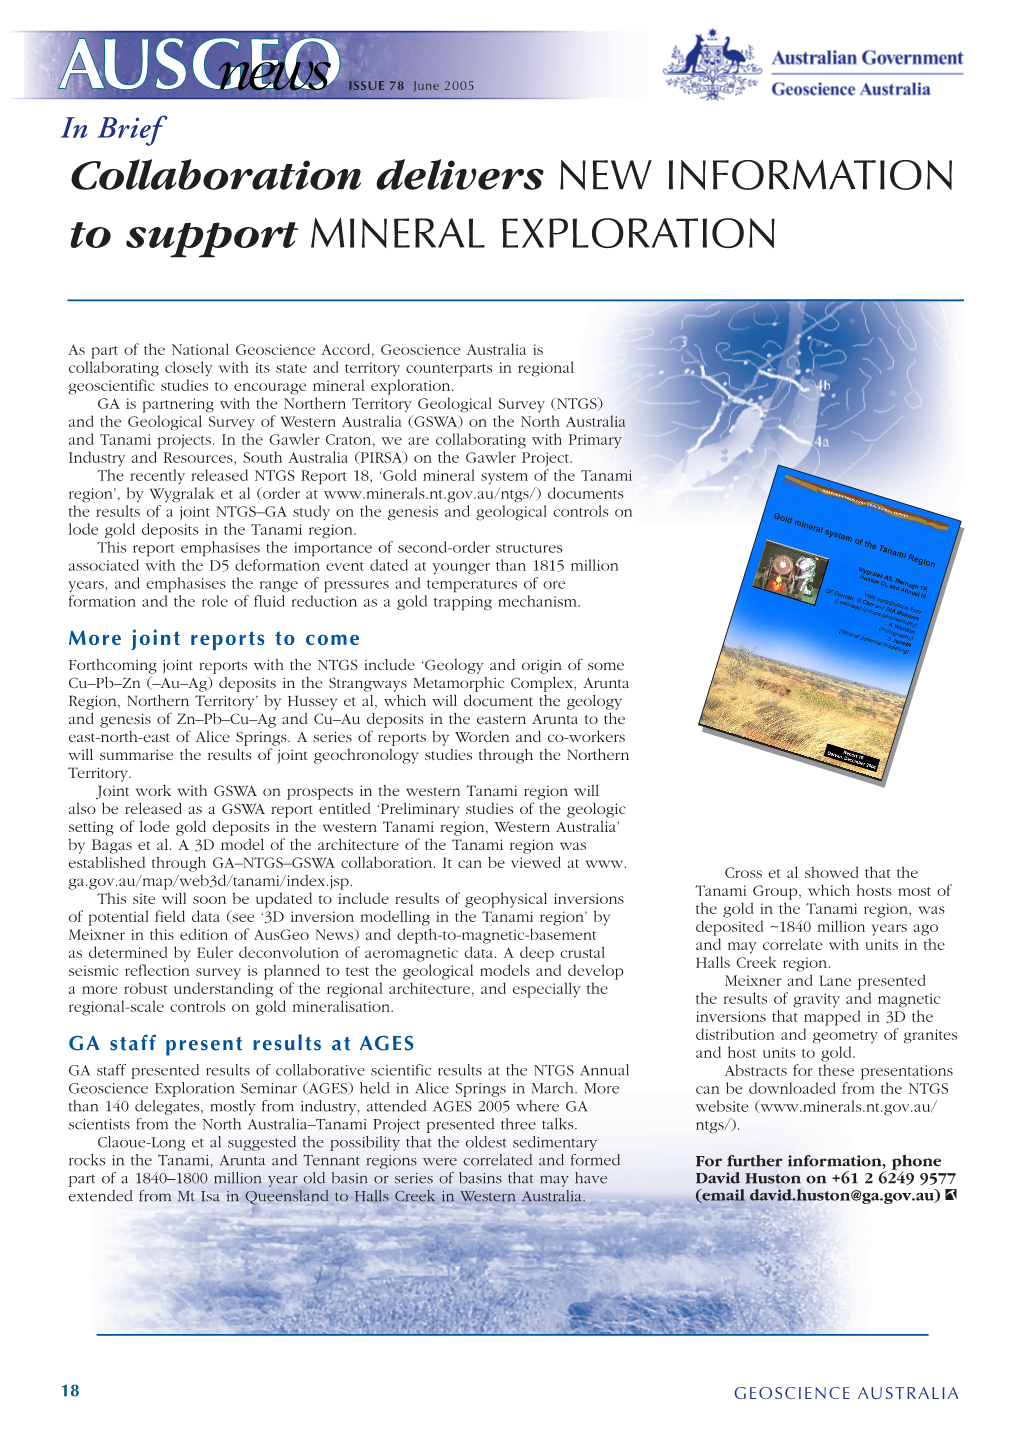 Collaboration Delivers NEW INFORMATION to Support MINERAL EXPLORATION